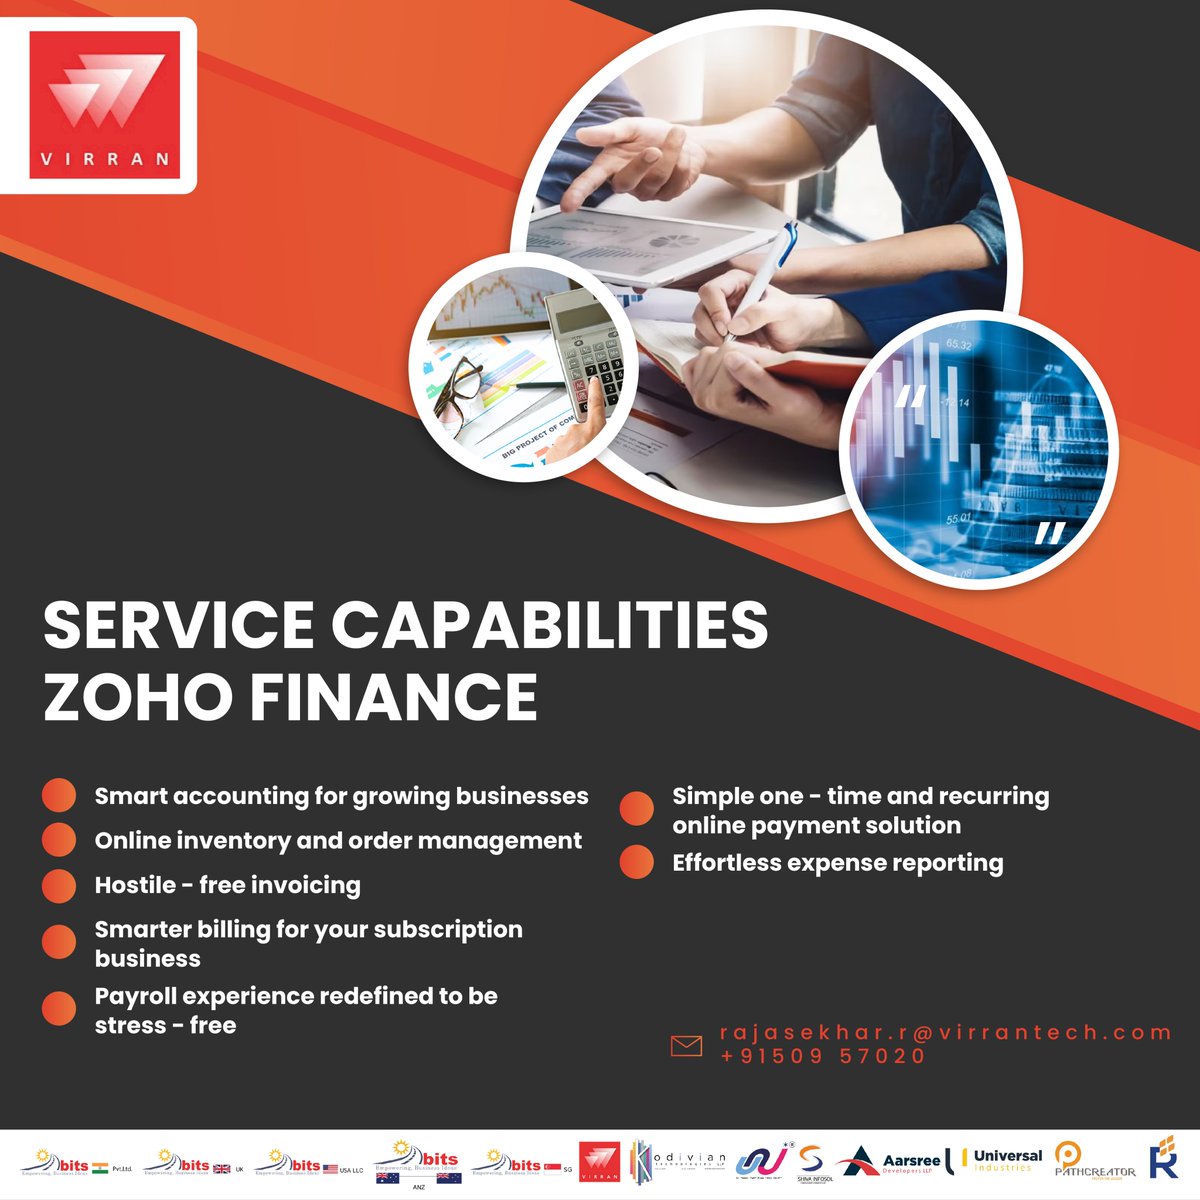 Our Service Capabilities - Zoho Finance

#ssgroup #abits #virran #service #capabilities #finance #zohobooks #zoho #zohosurvey #zohocrm #zohopayroll #zohoinvestments